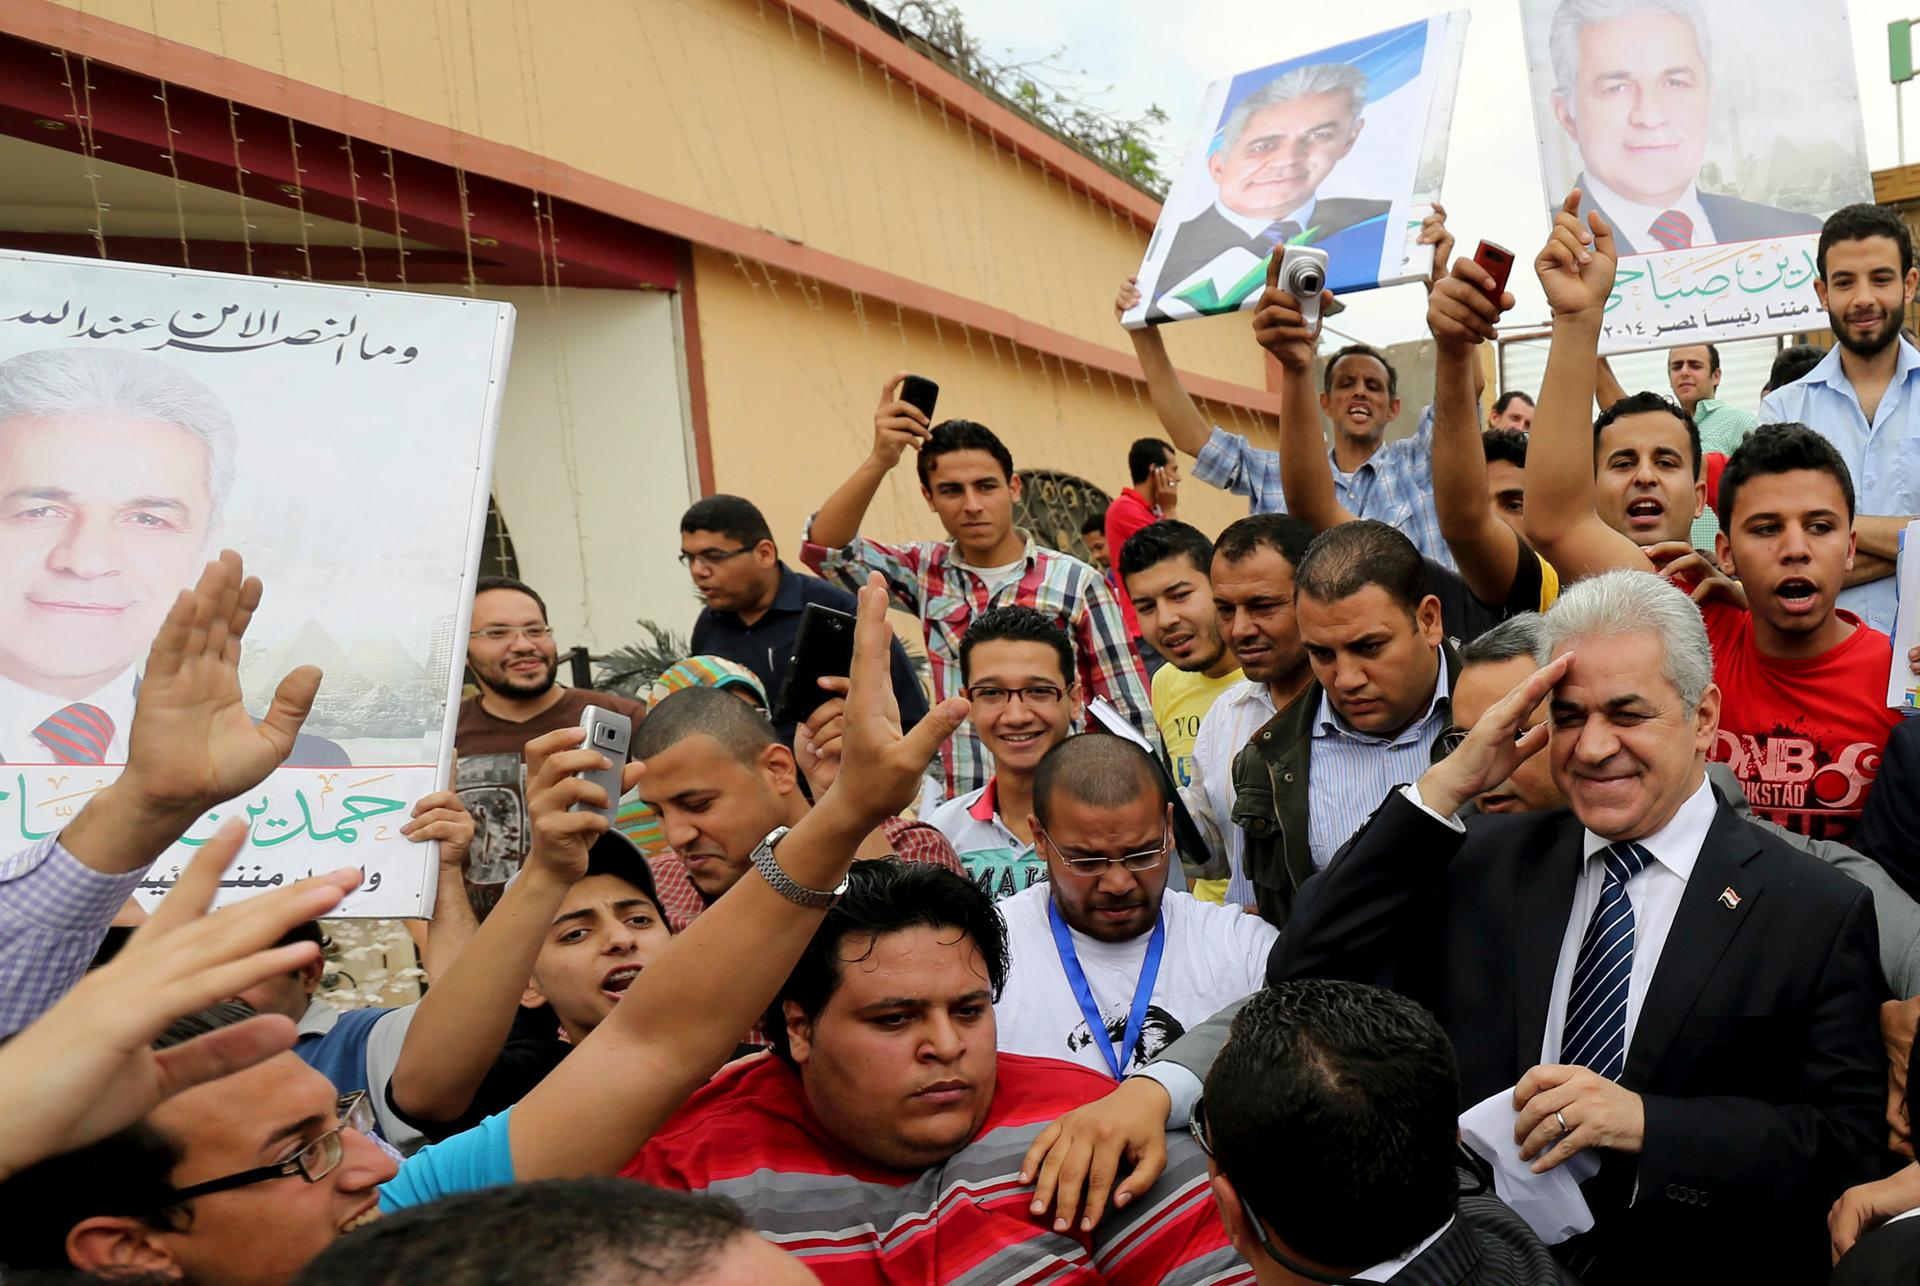 Egypt's leftist presidential candidate Hamdeen Sabahi (center) gestures before a rally in Banha, northwest of Cairo. Egyptians will vote in presidential elections on May 26 and 27.